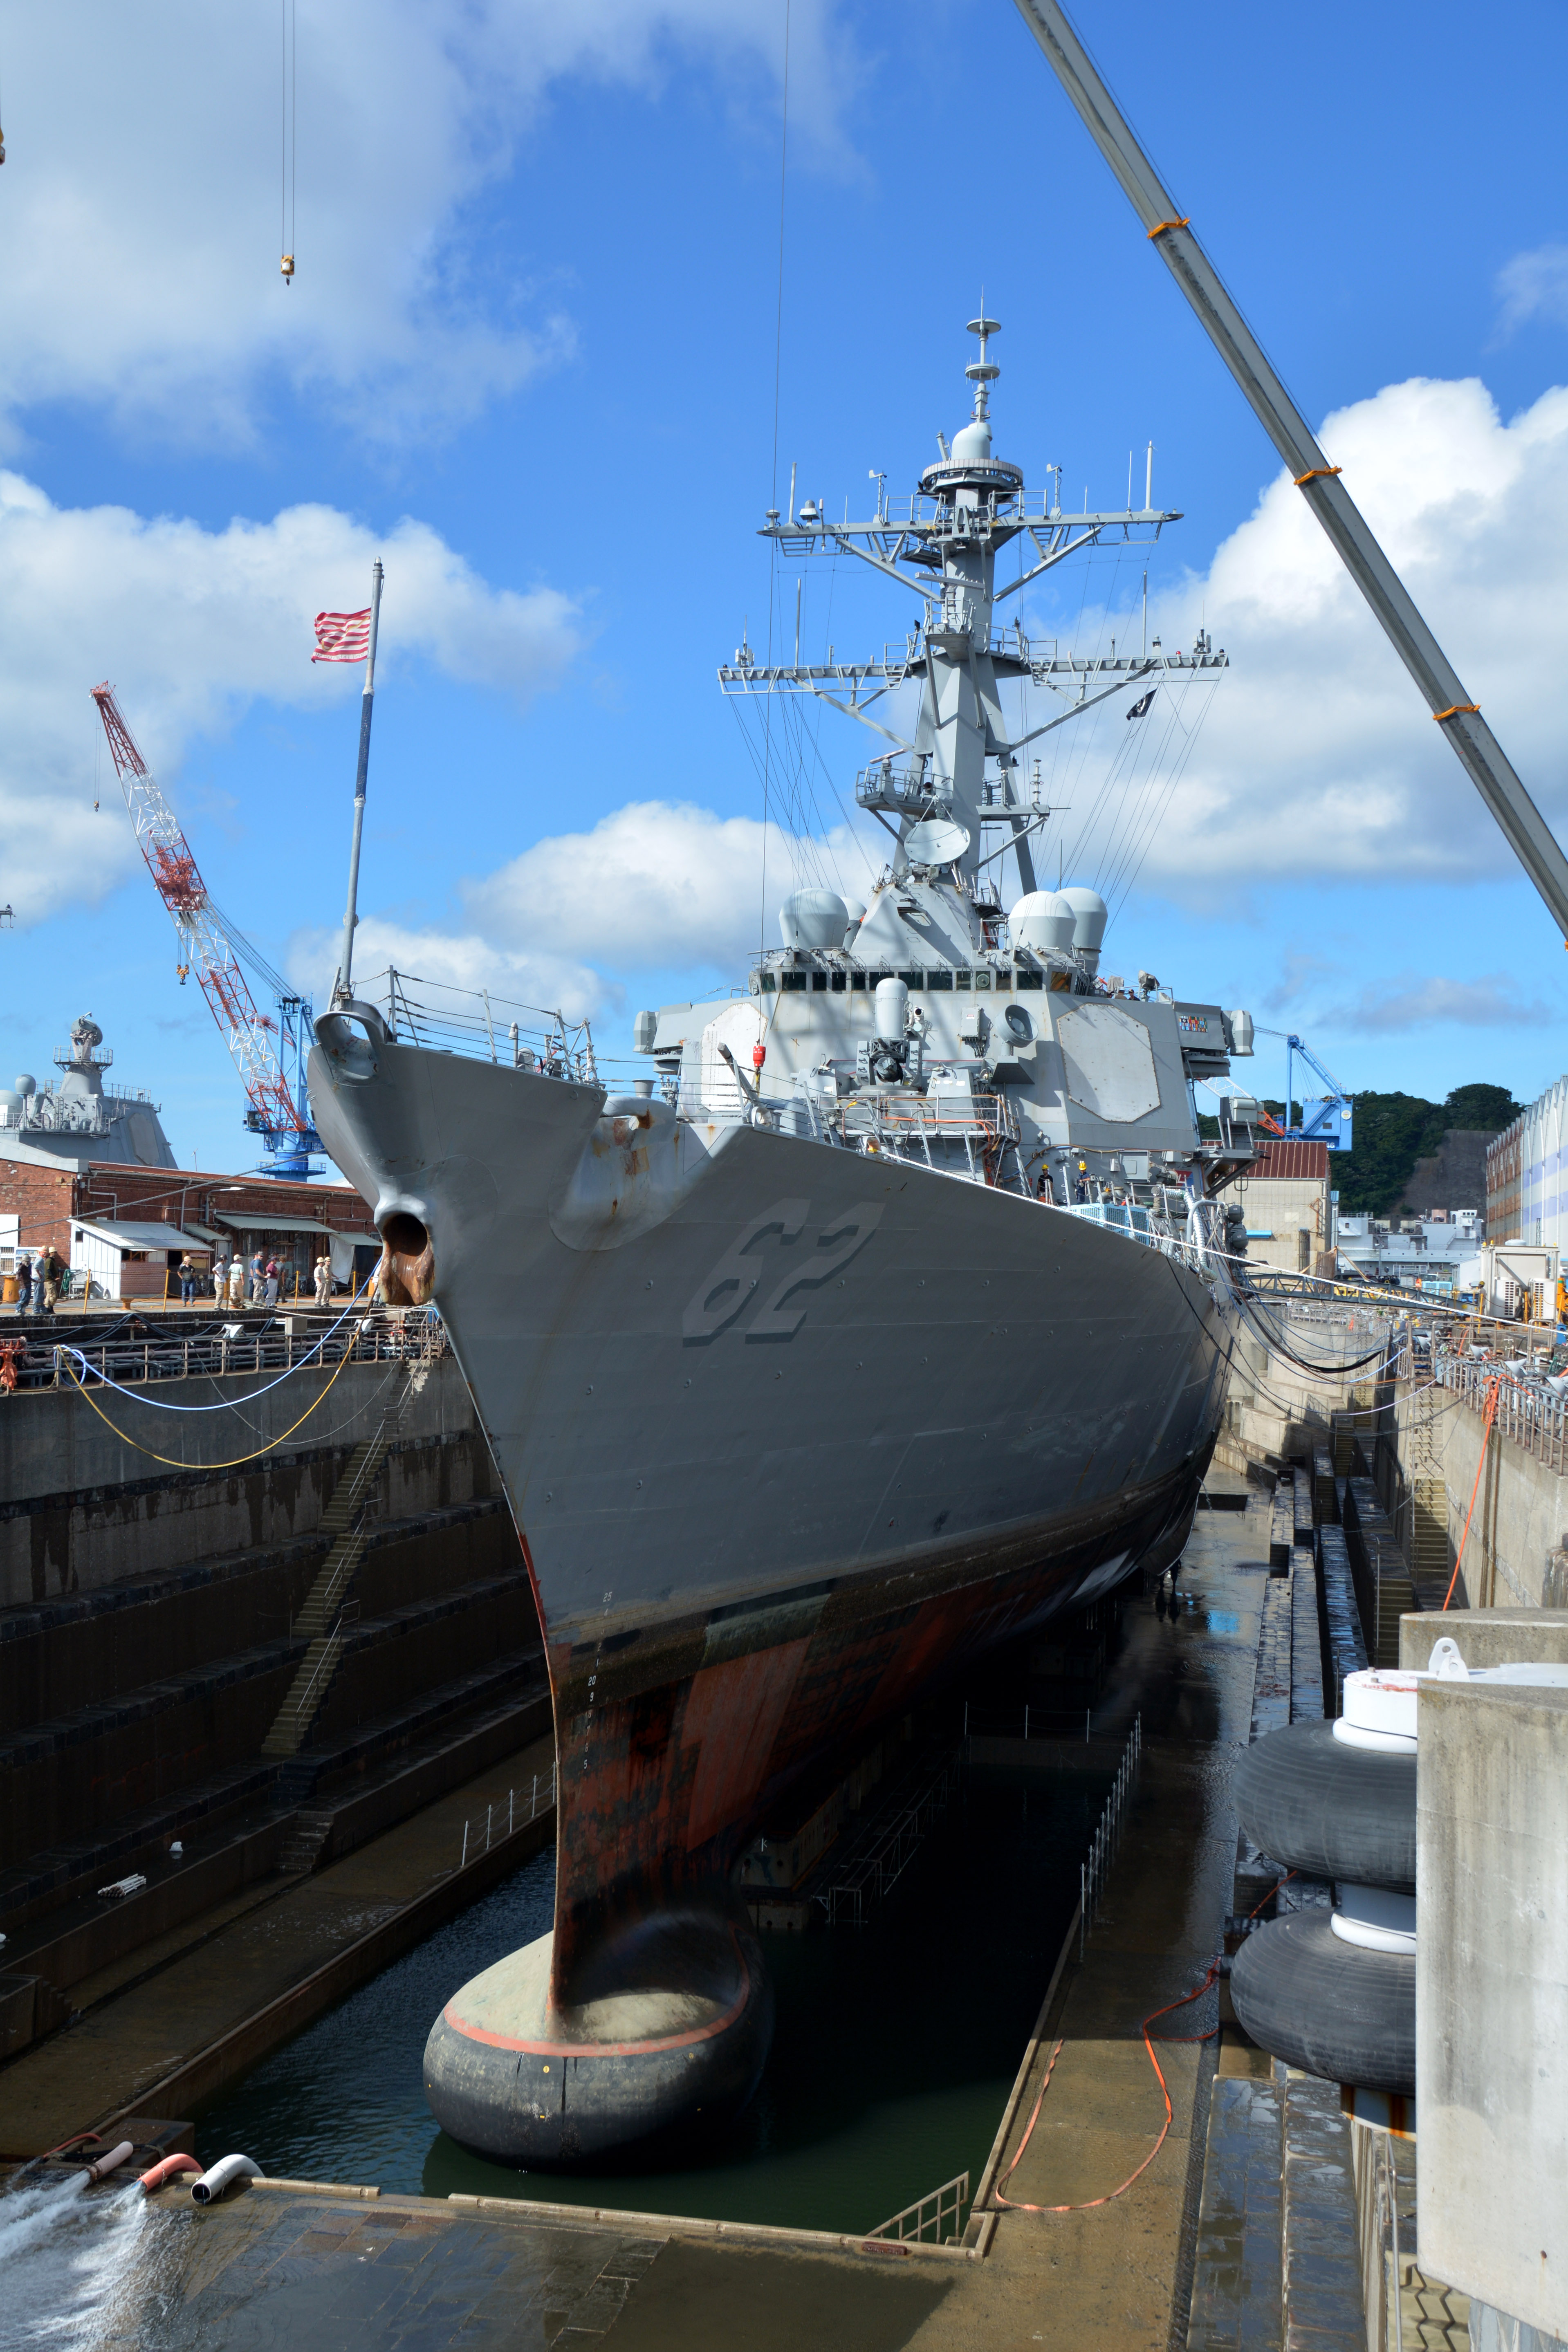 New Dry Dock Photos Show the Scope of Hidden USS Fitzgerald Damage